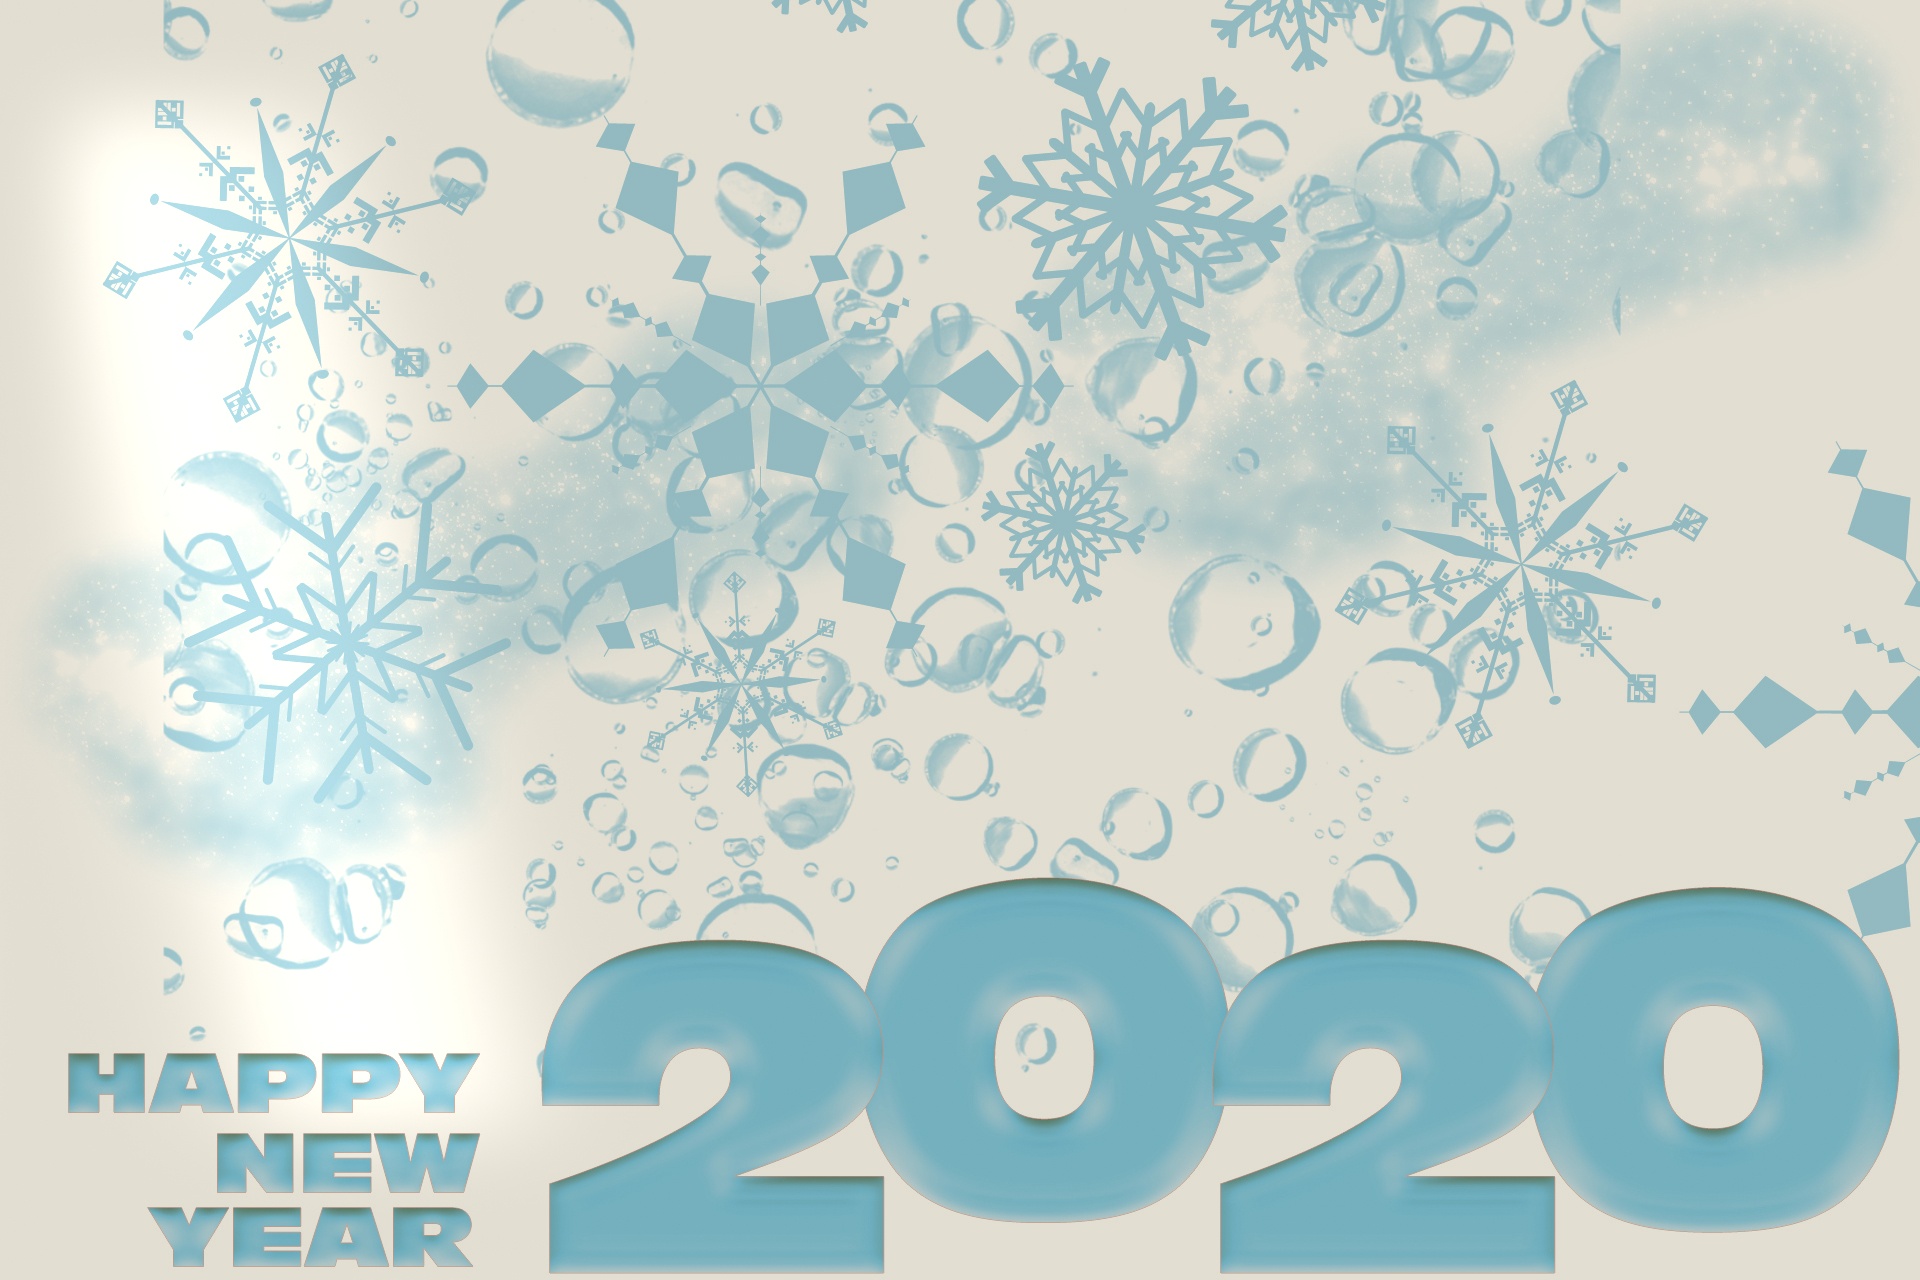 2020 Blue And White Postcard